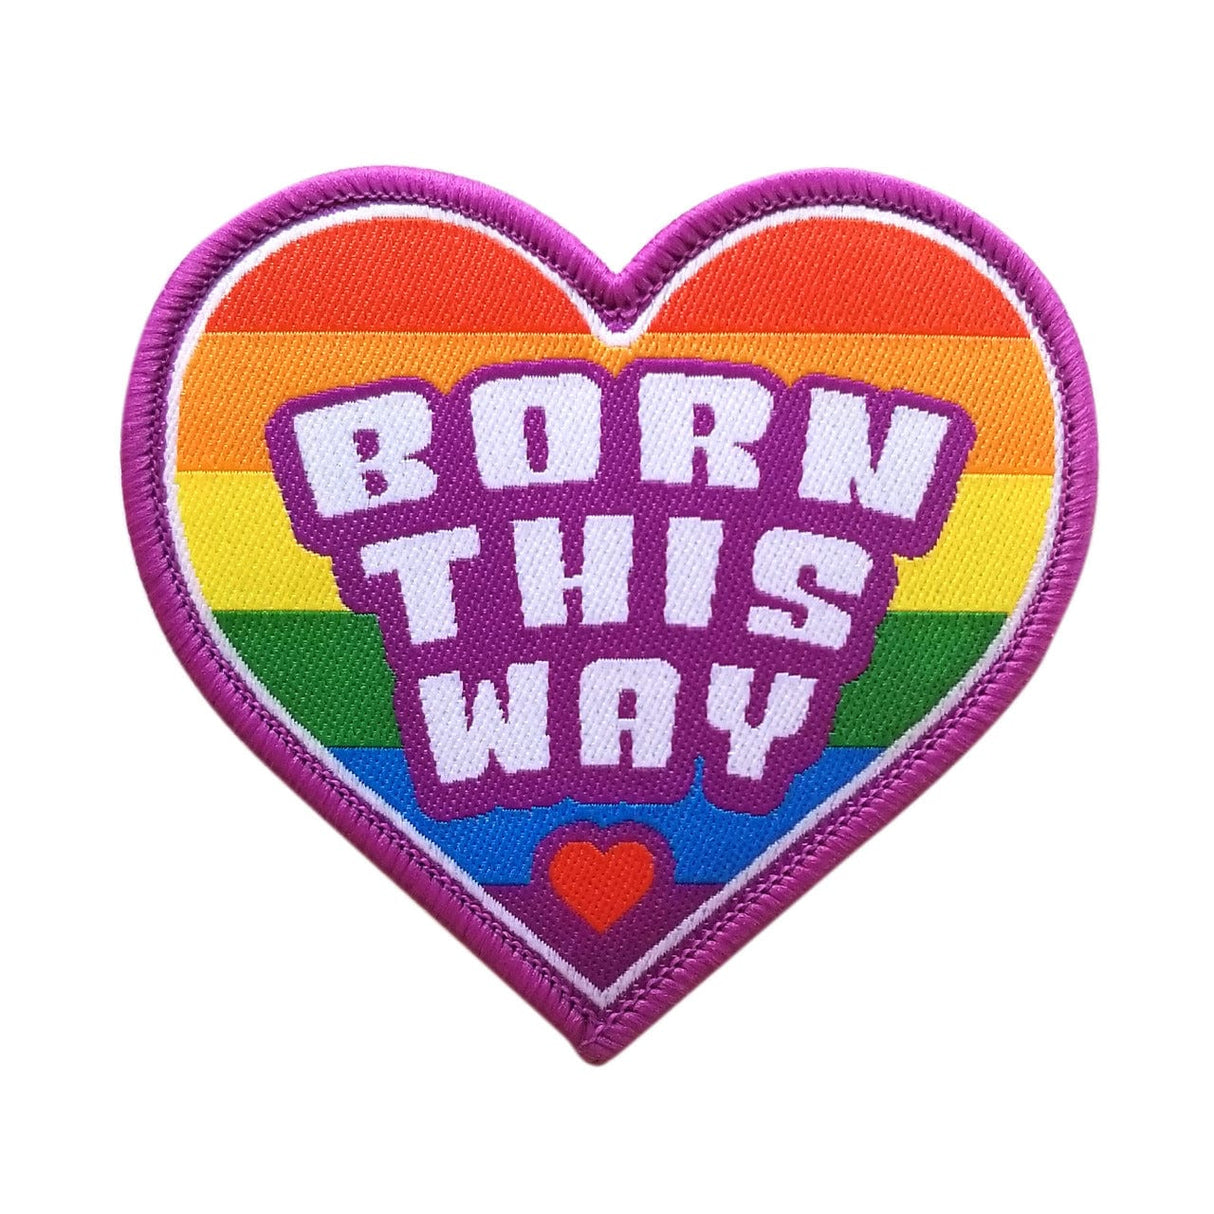 Born This Way Iron On Patch